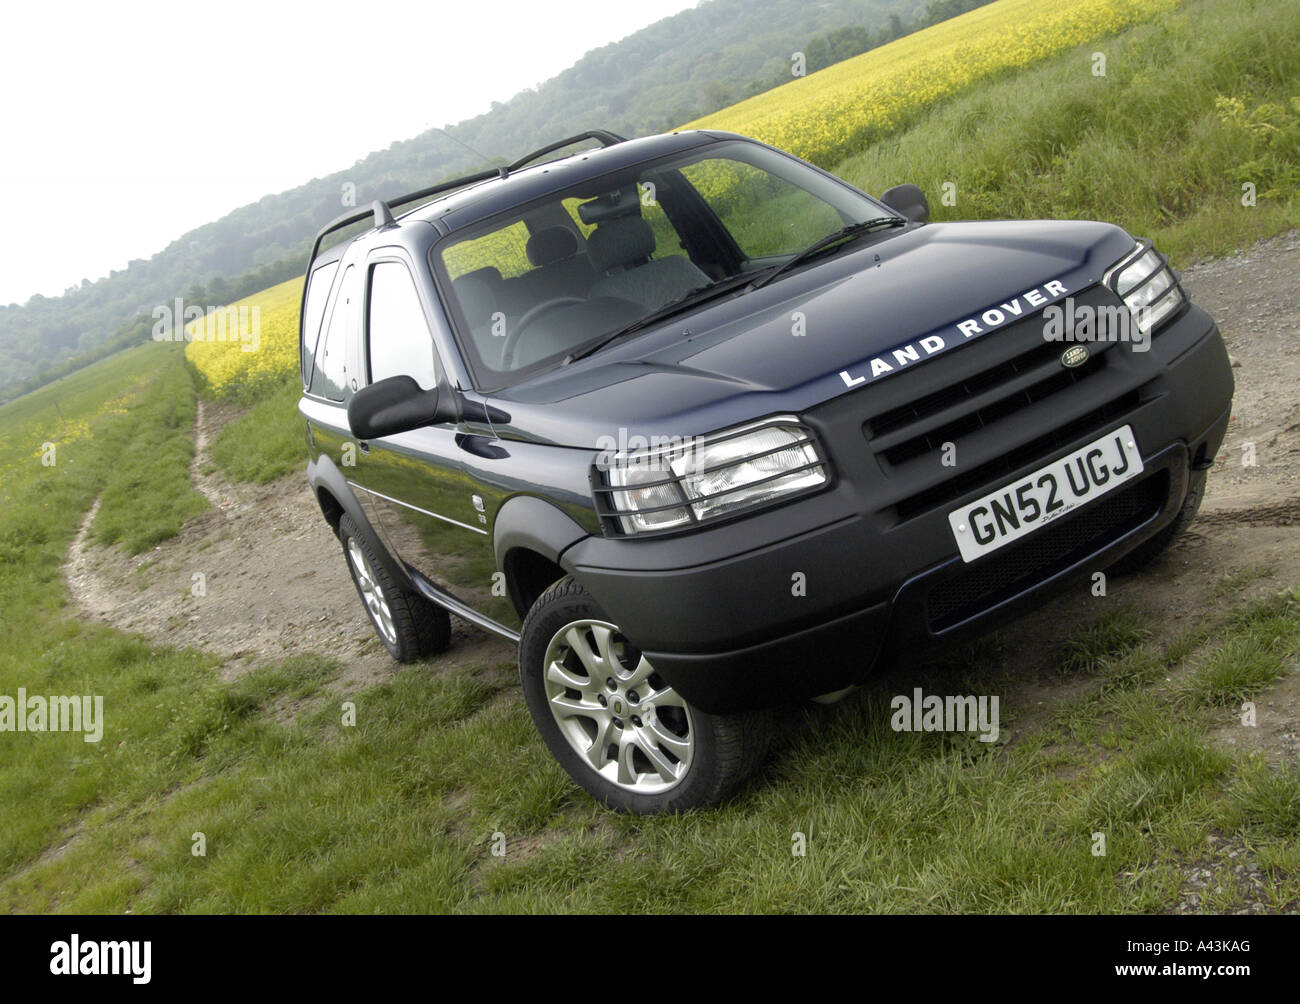 2002 Land Rover Freelander Mark 1 off road in the countryside. Oslo blue Vortex alloy wheels light guards roof bars Stock Photo